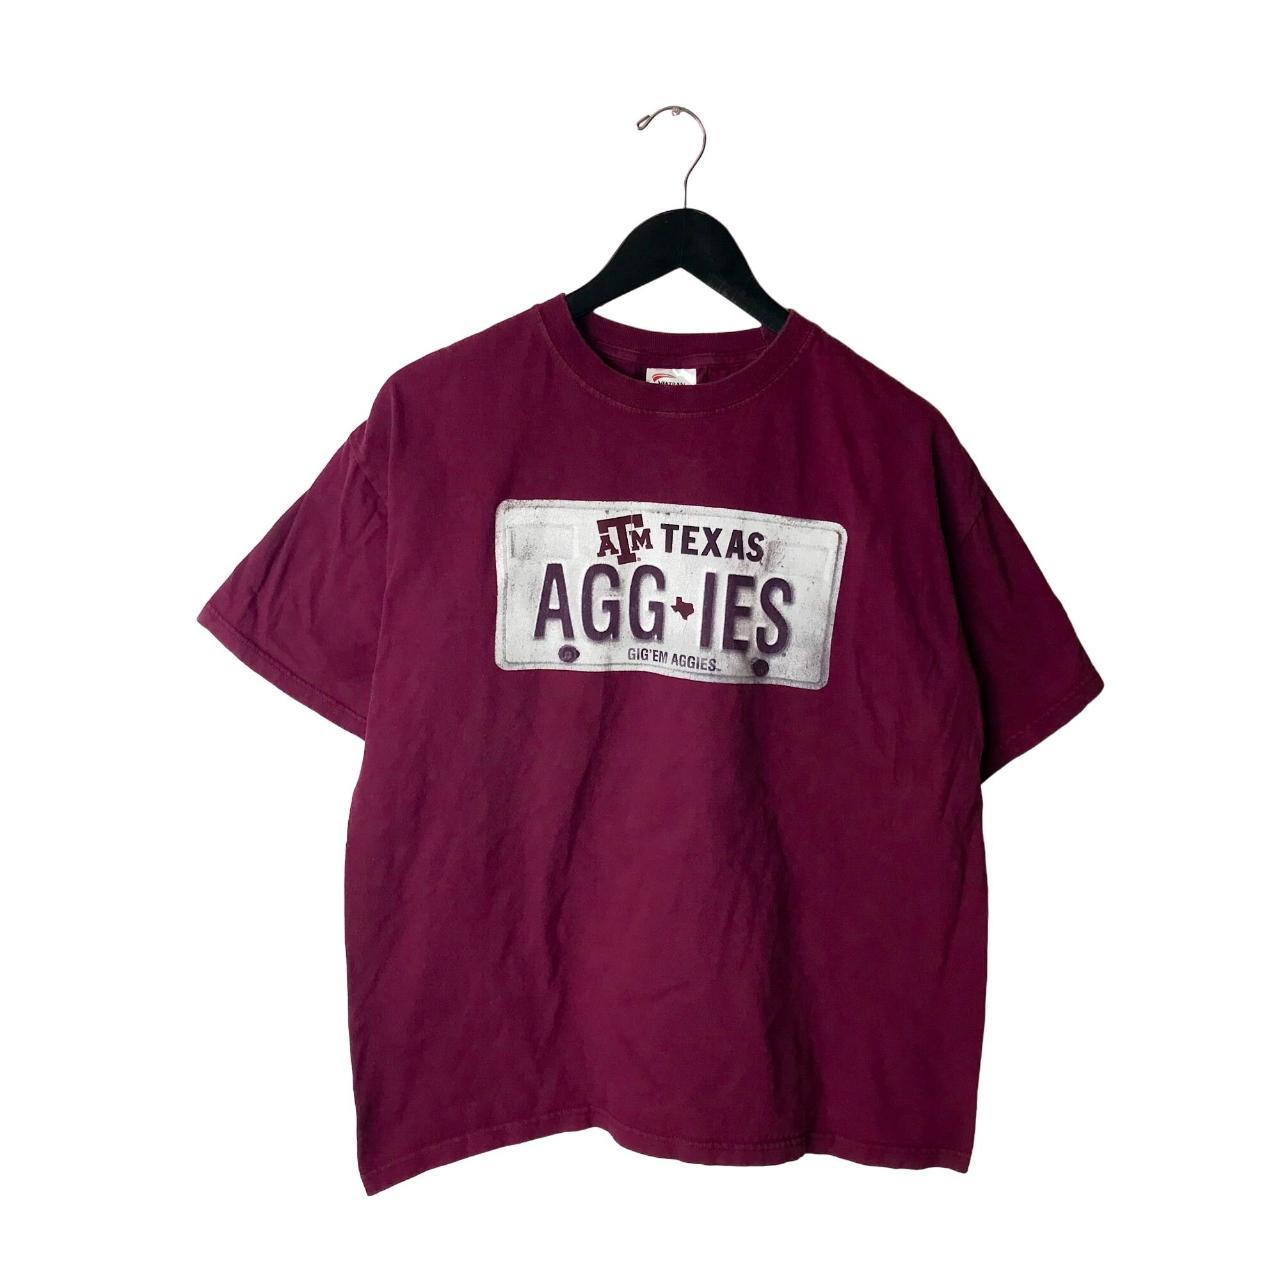 A&M Texas Aggies T Shirt Adult Red L Large - Depop